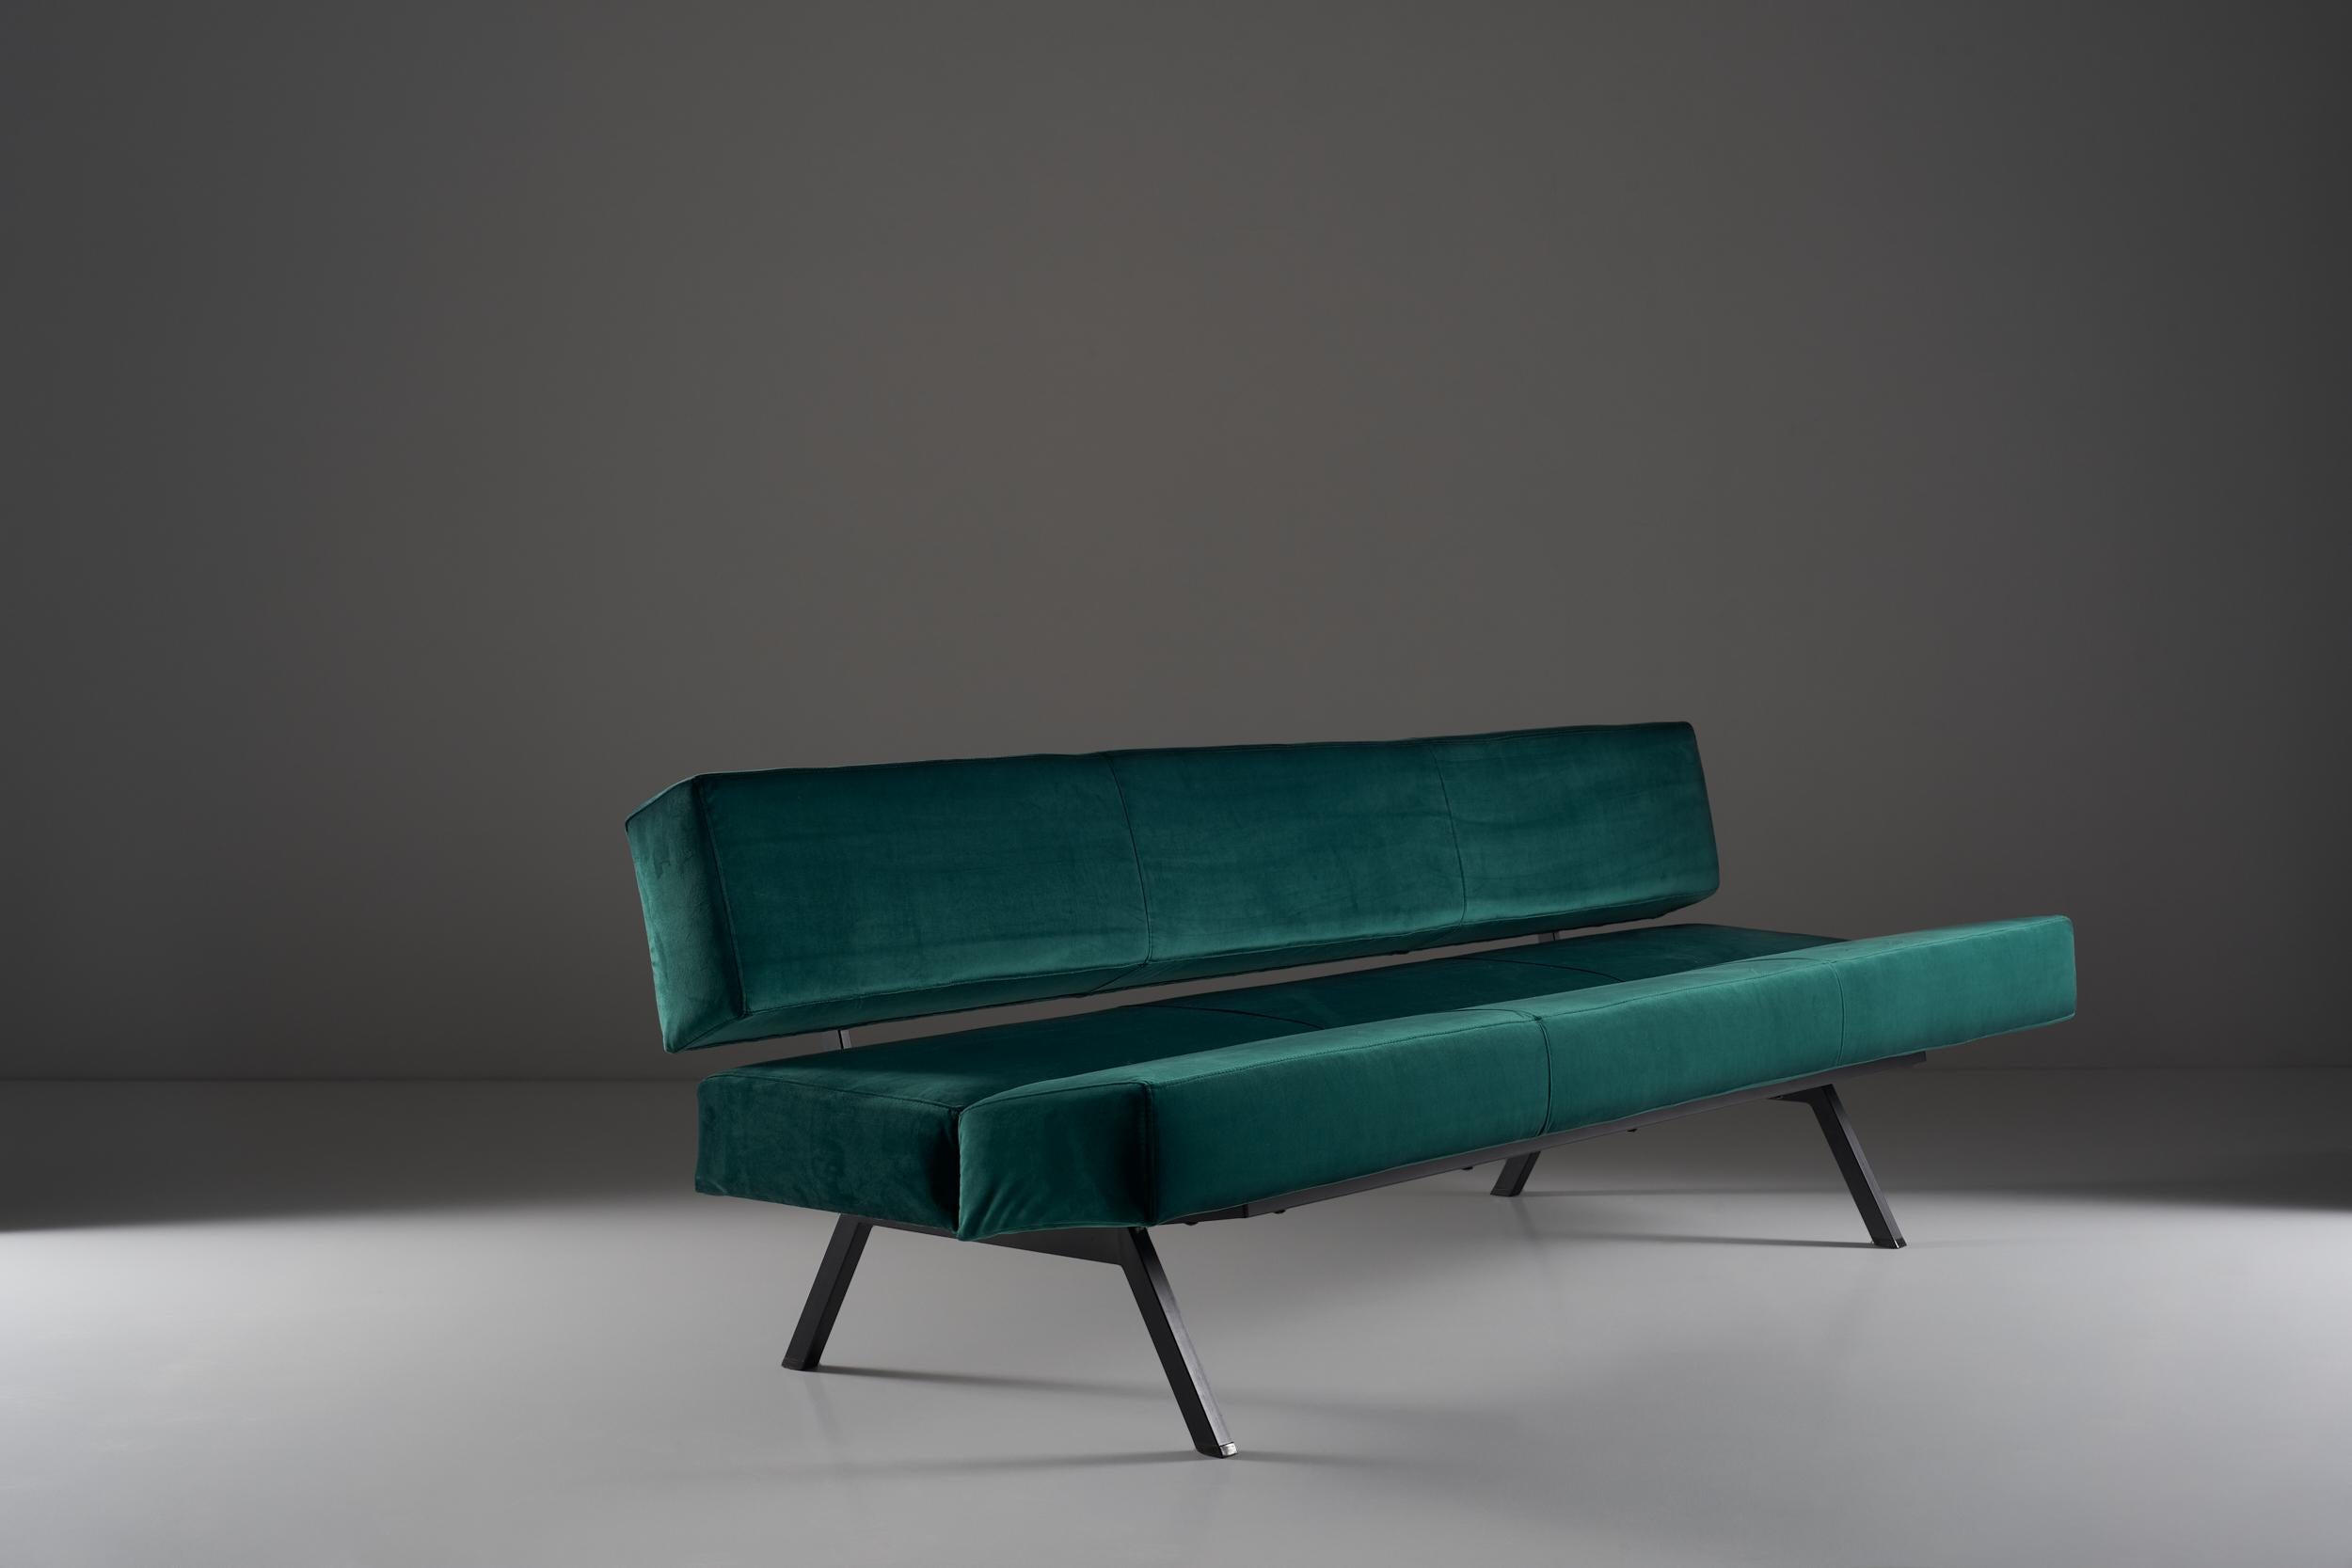 Elegant and modern sofa designed by Rito Valla for the IPE of Bologna. The mobile structure in black lacquered metal follow the different moments of the day from relaxed to more formal positions, for maximum comfort. Exquisite piece of design with